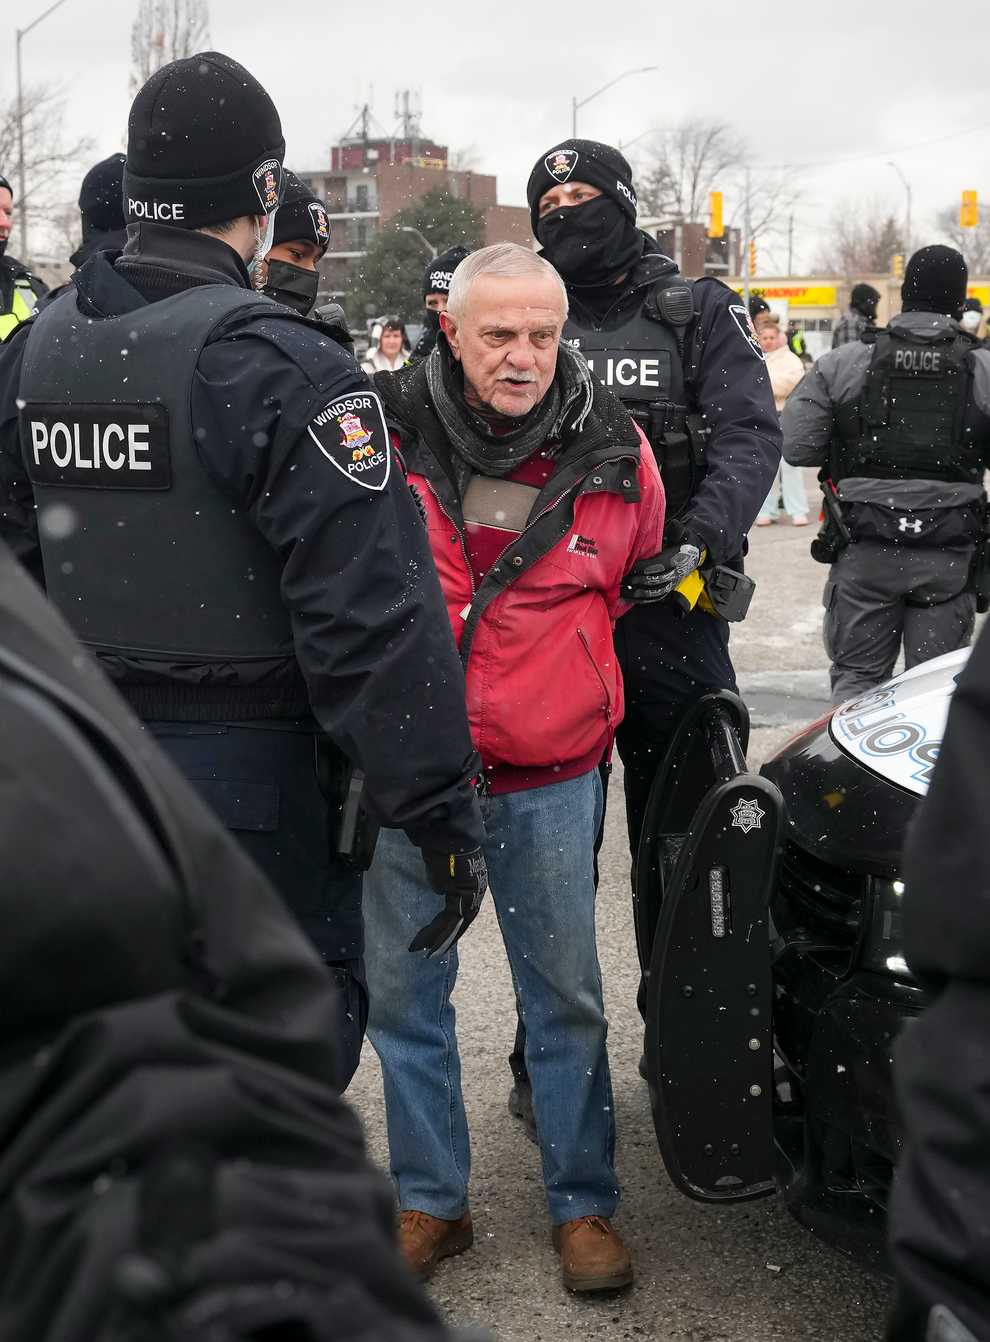 A protester is arrested as police remove truck drivers and supporters at the Ambassador Bridge linking Detroit and Windsor (Nathan Denette/The Canadian Press via AP)